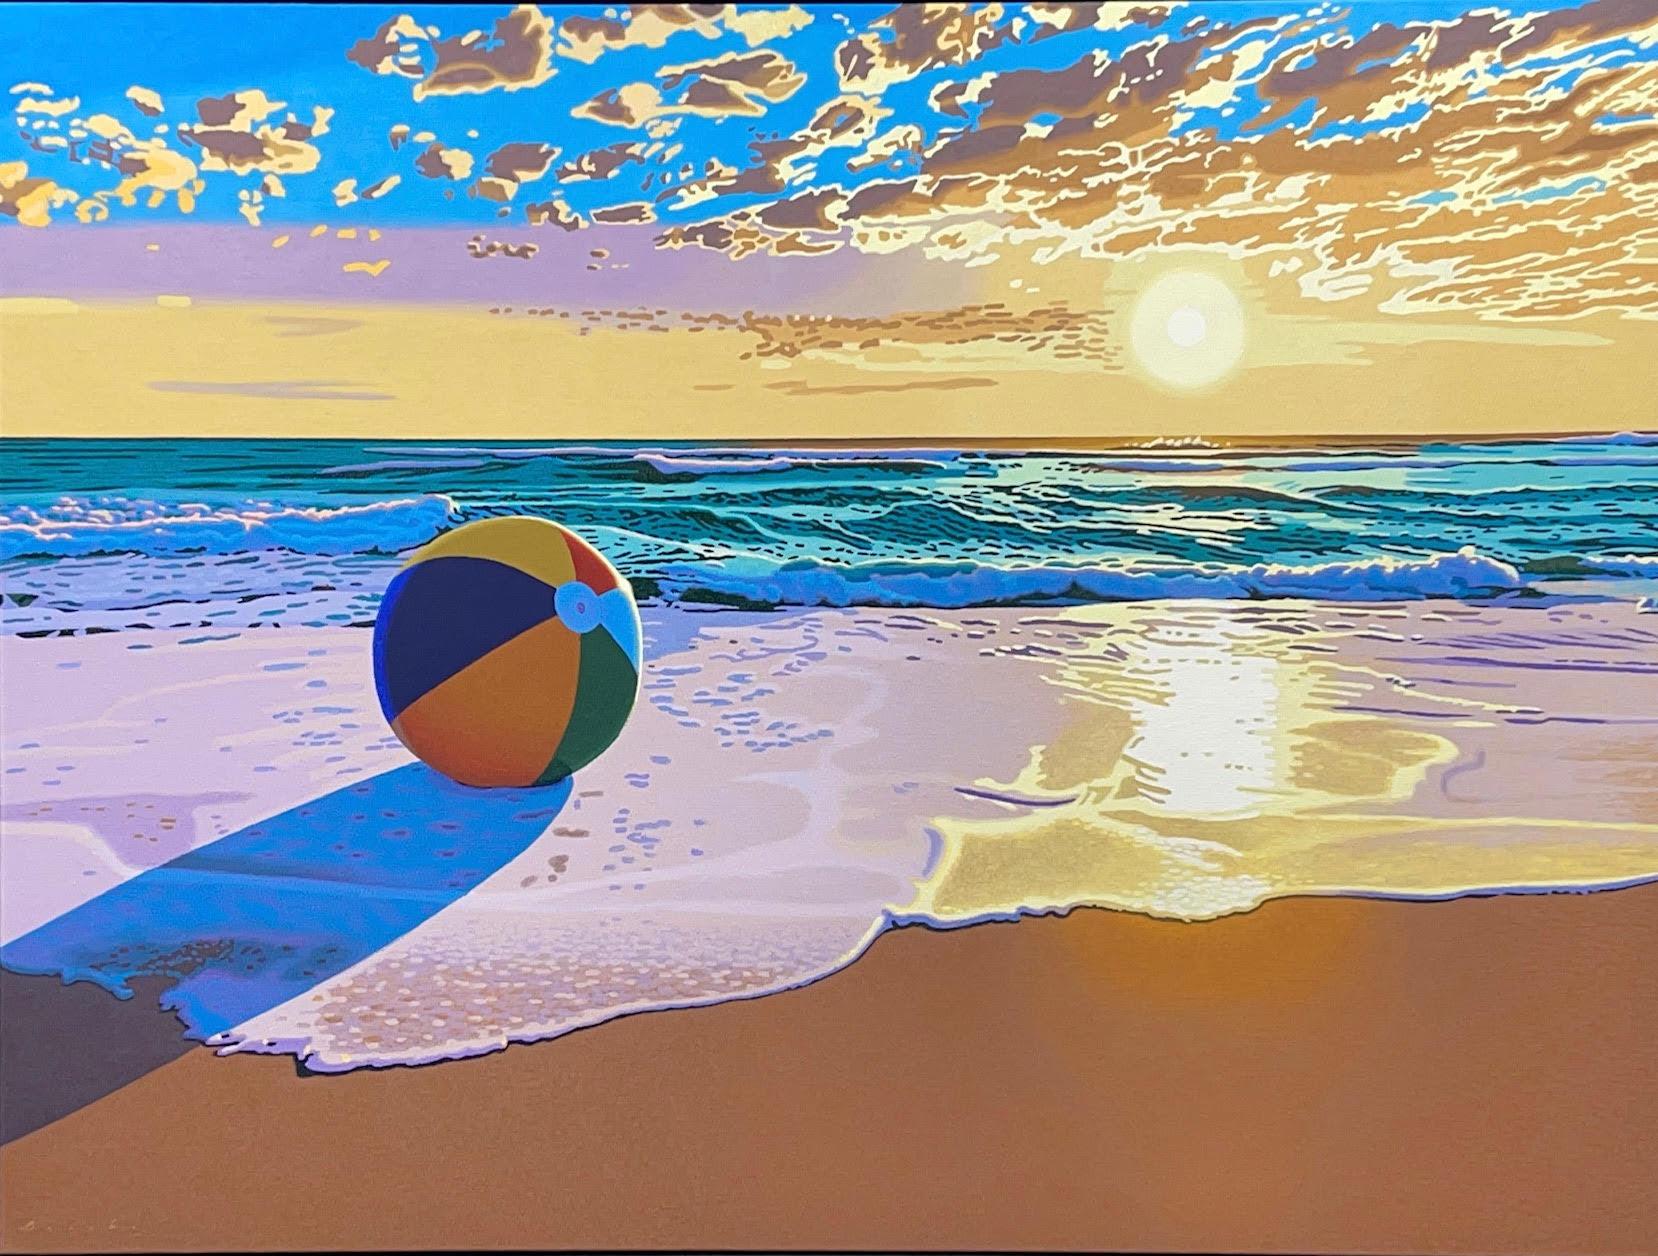 Rob Brooks Still-Life Painting - "Beach Ball Sunset" Oil painting of a beach ball on the ocean shore with sunset